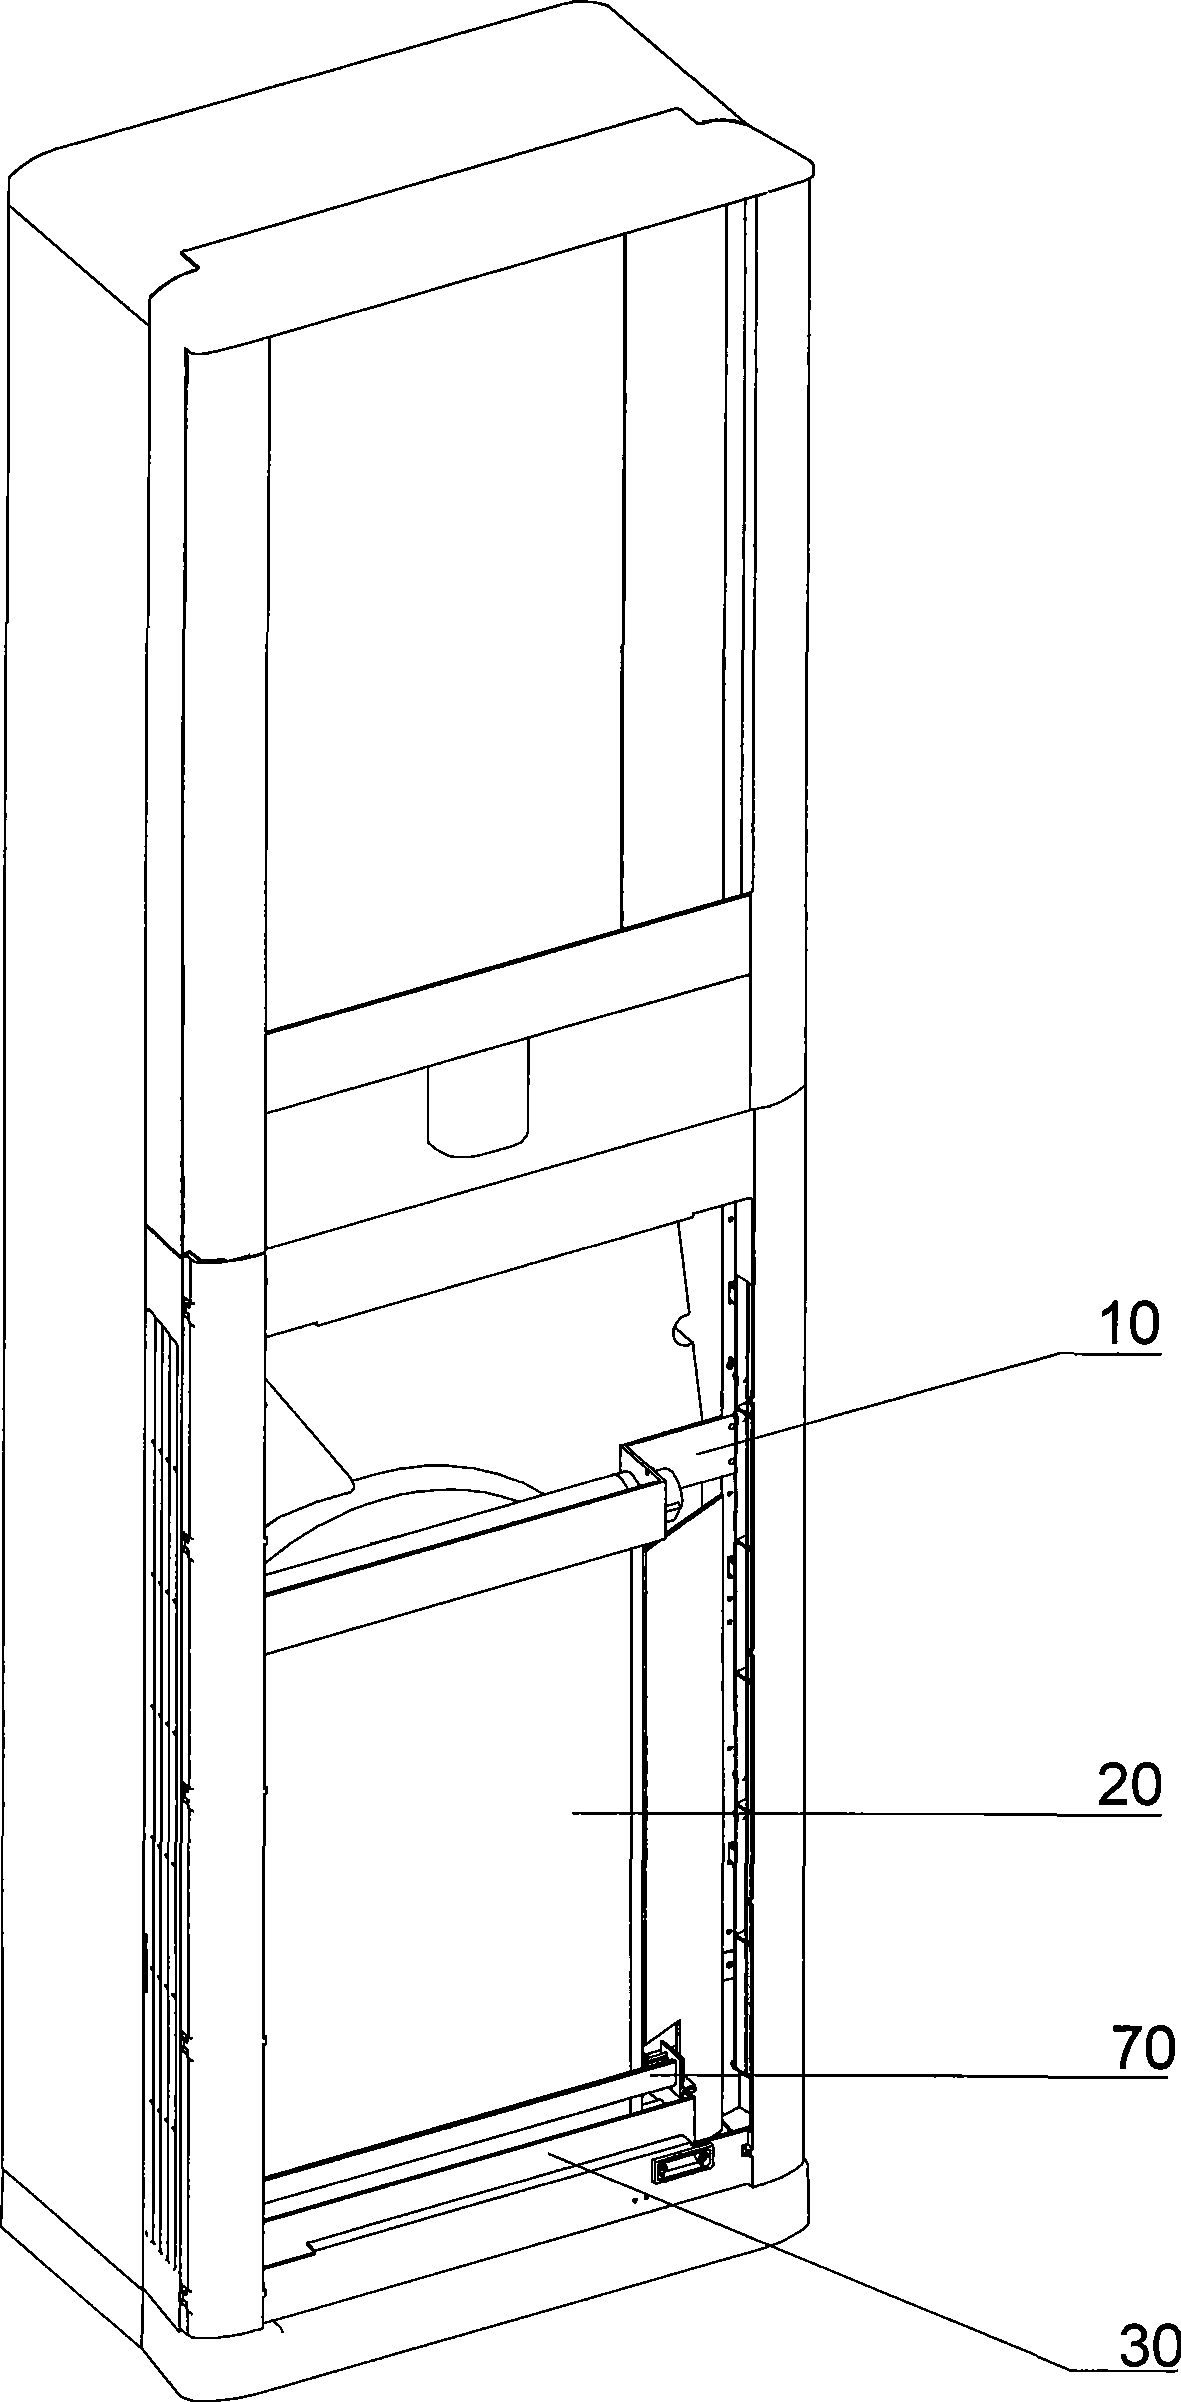 Air-conditioner filtering cleaning device